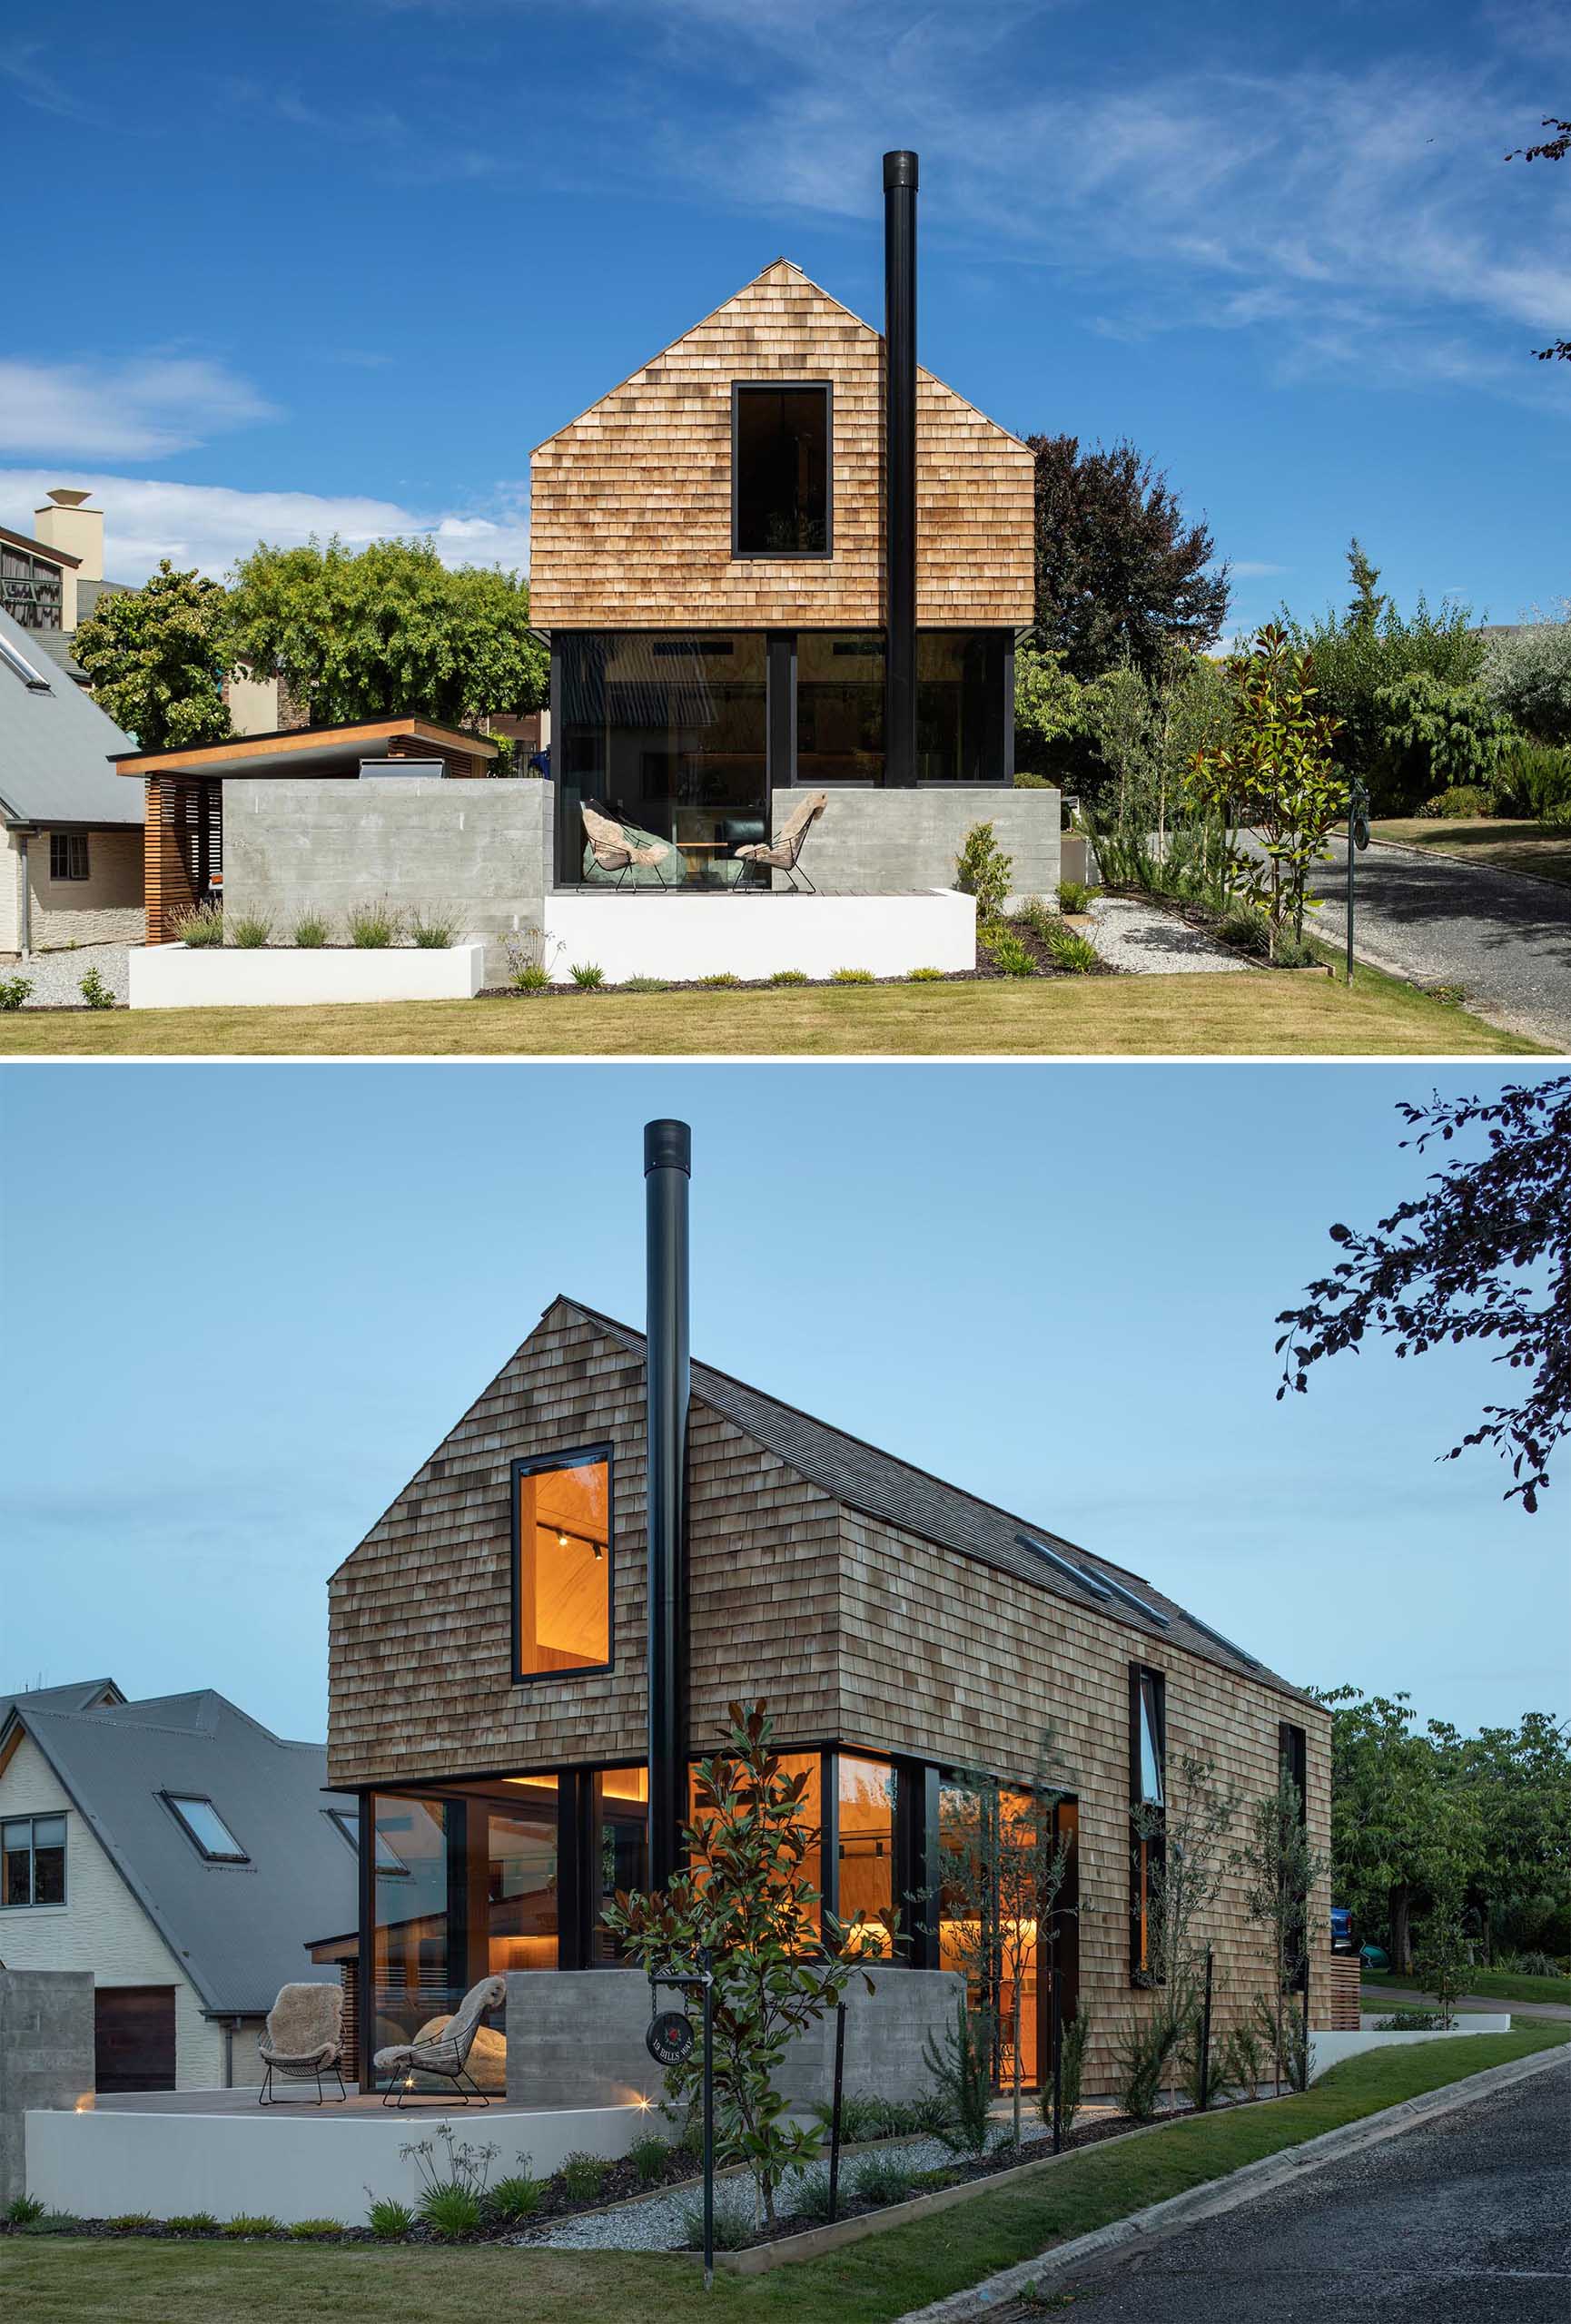 A modern yet small shingle clad home with black accents.